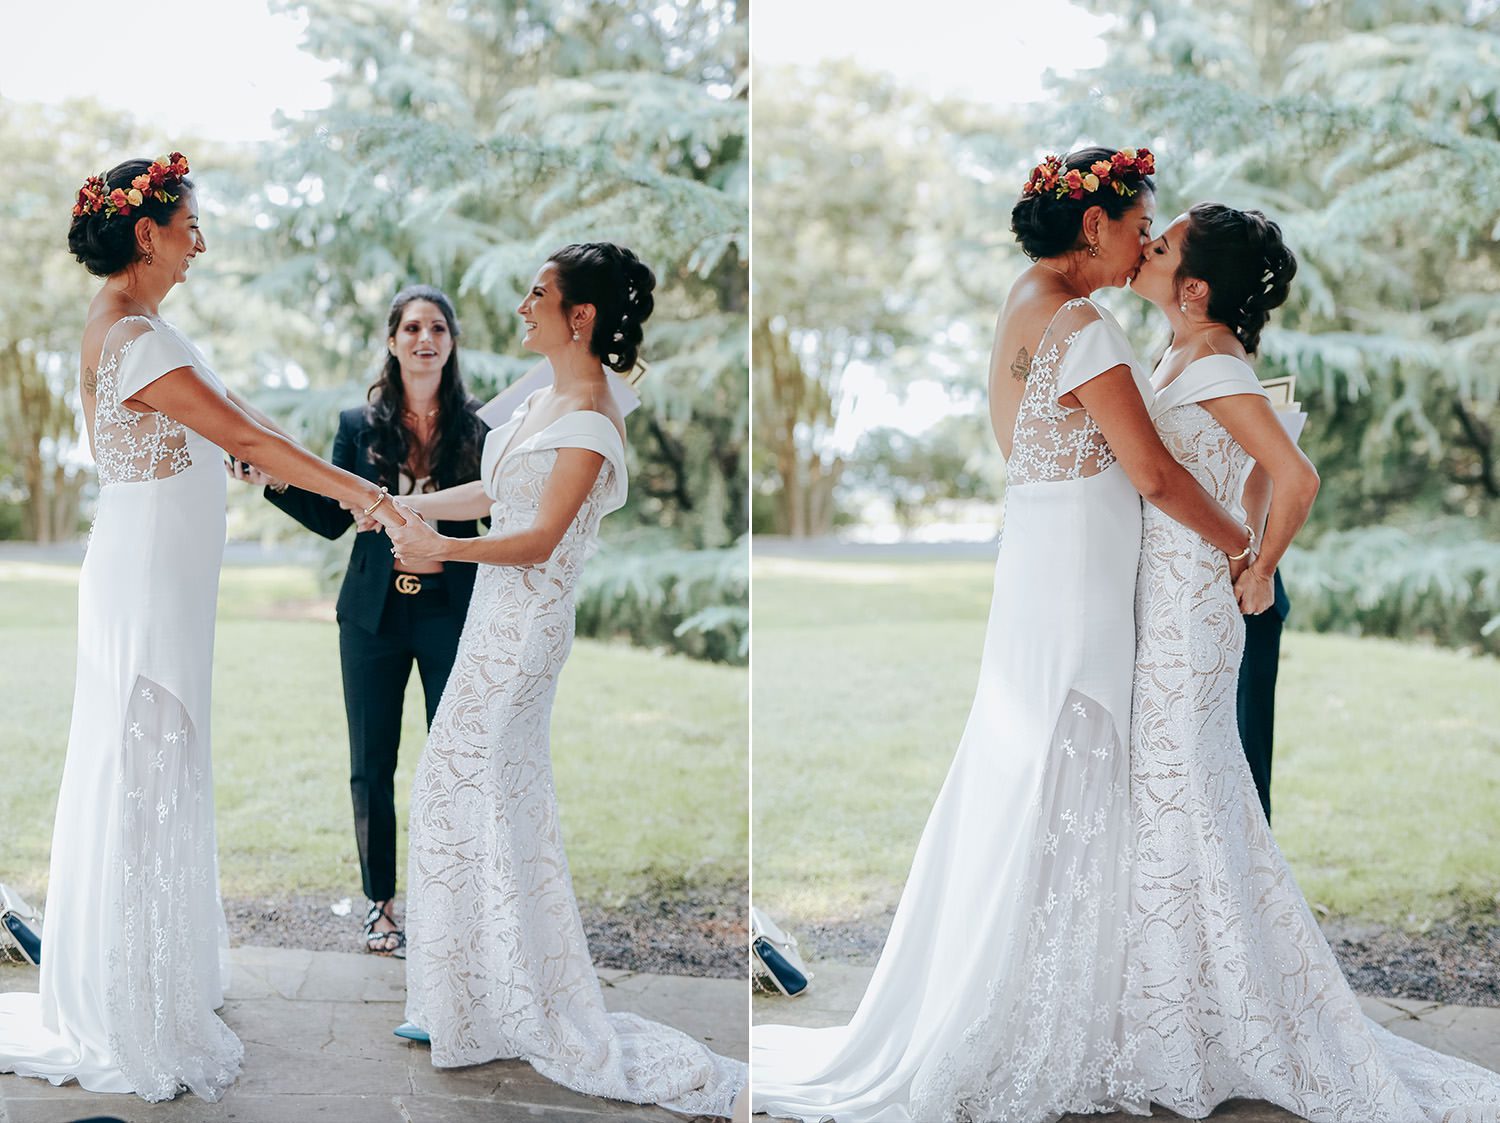 Texas queer wedding and engagement photographers